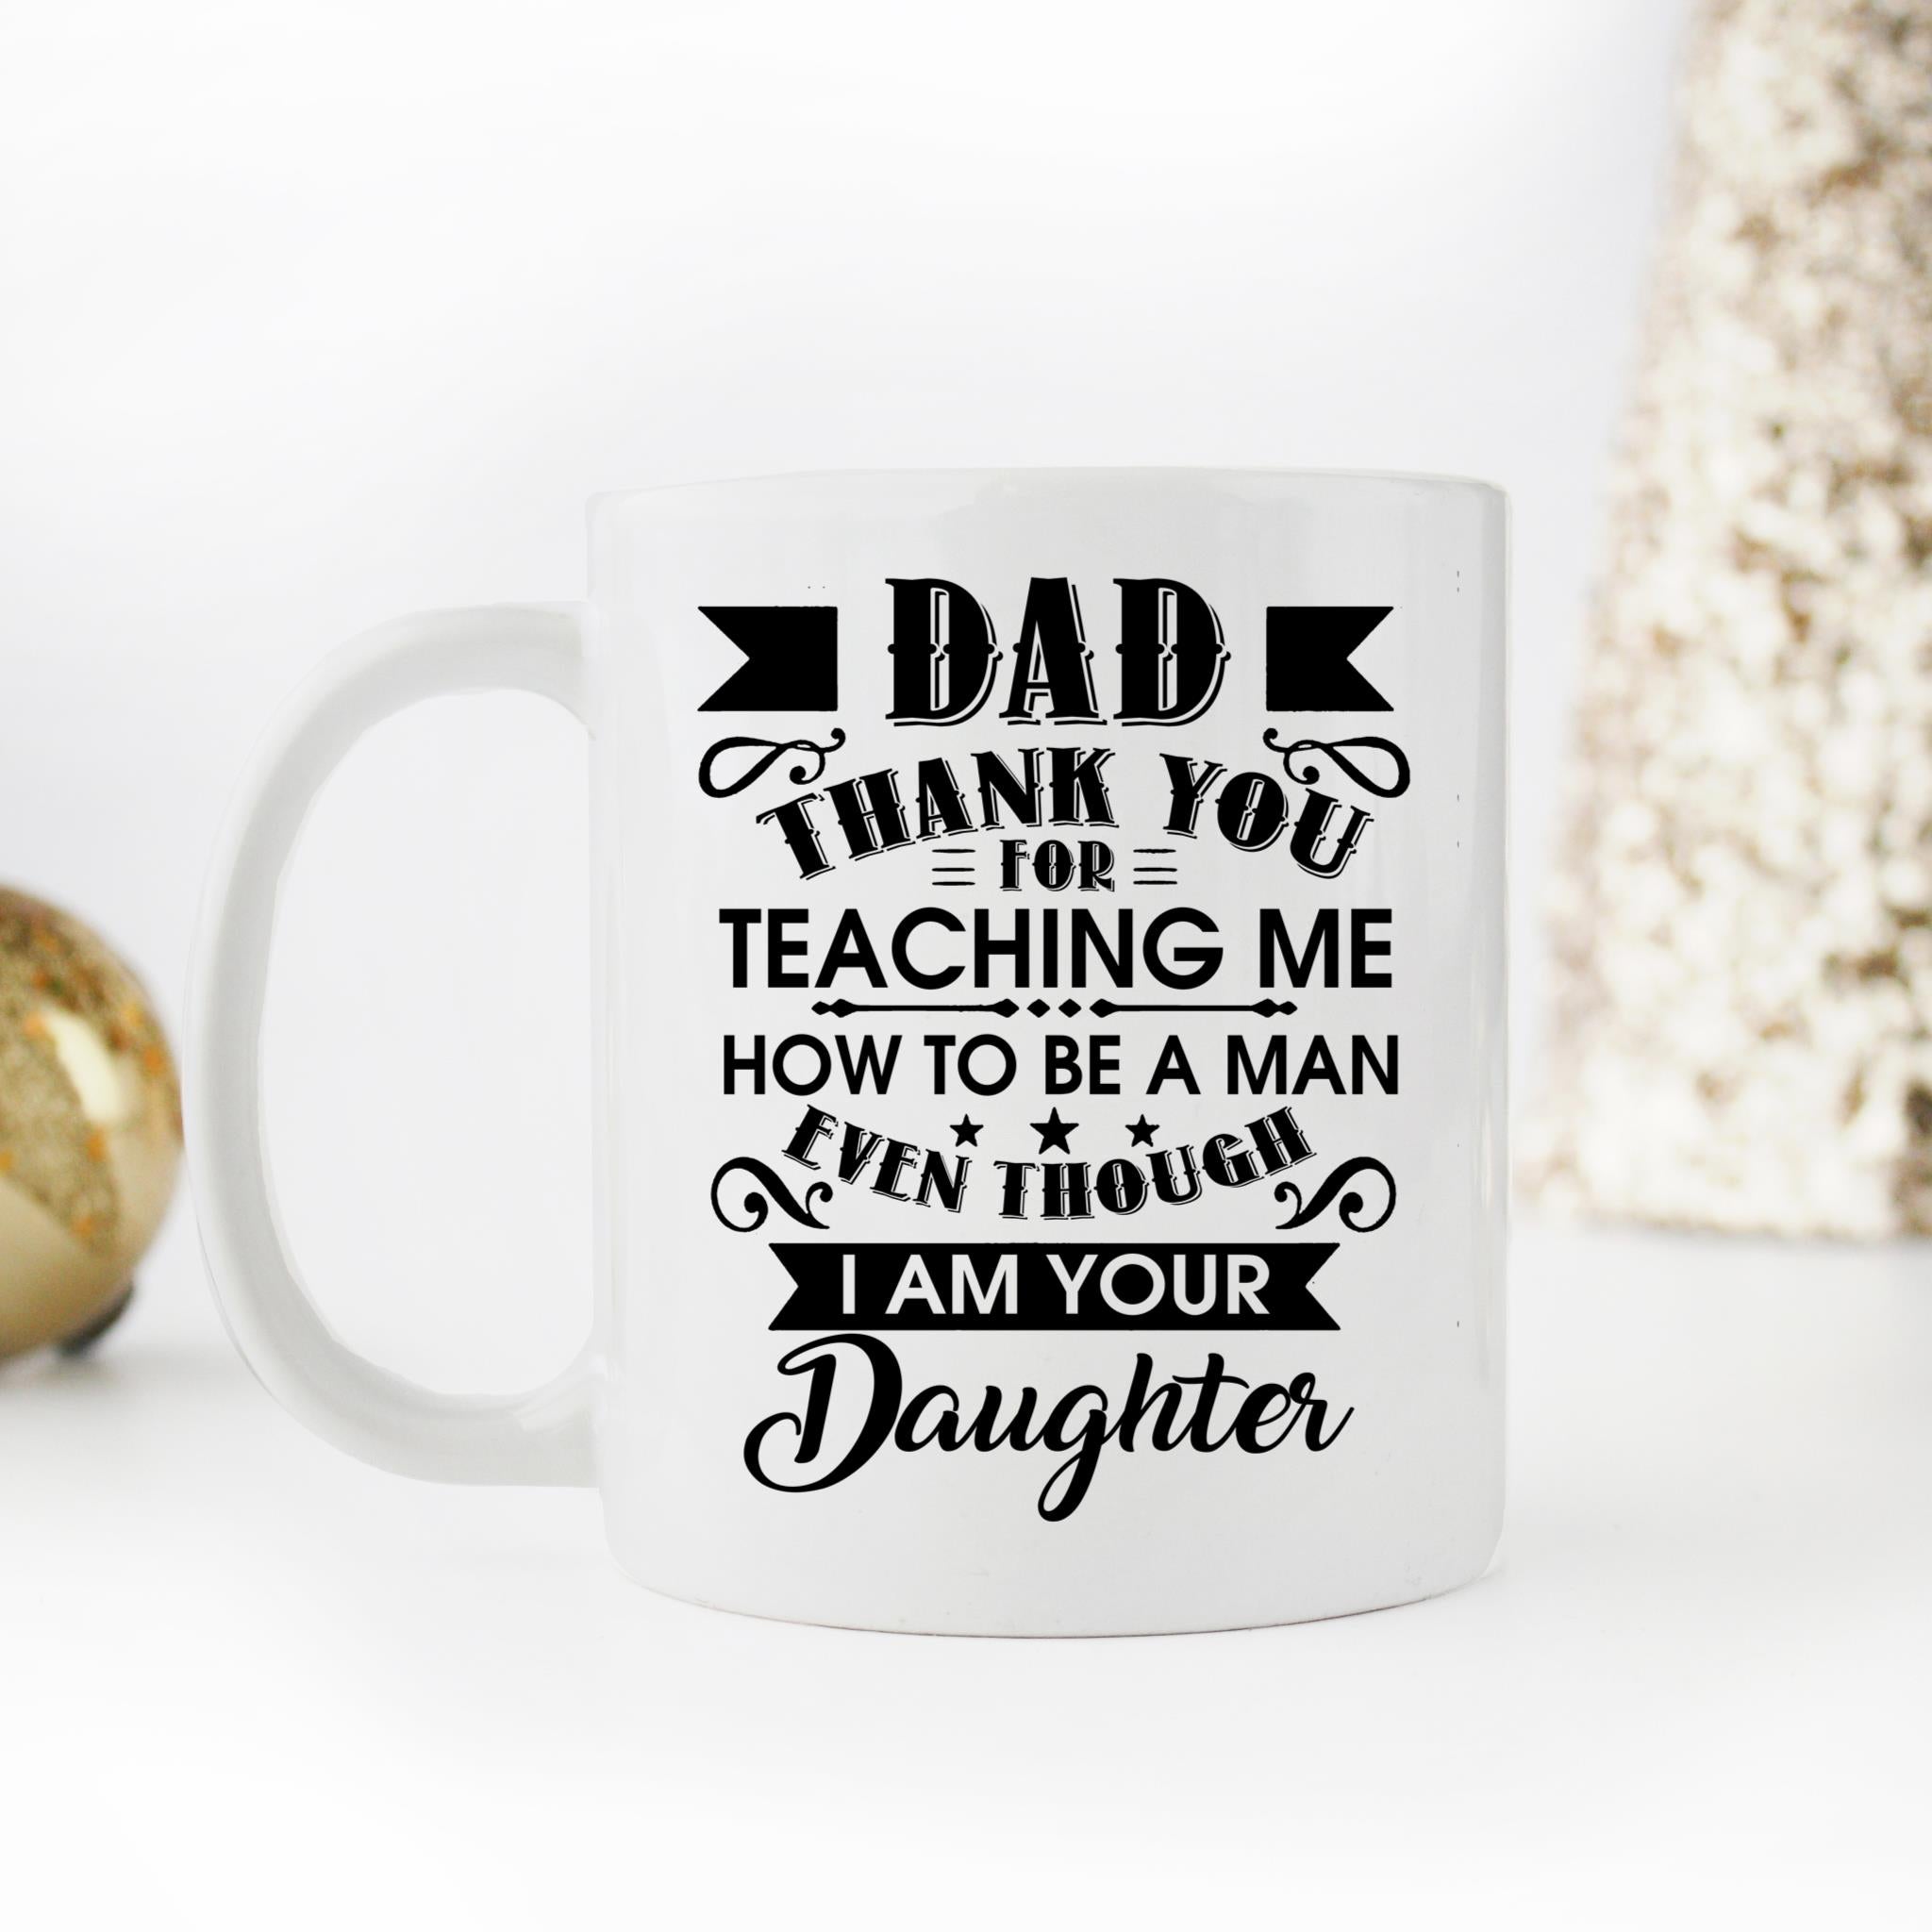 Skitongifts Coffee Mug Funny Ceramic Novelty M164 Dad, Thank You For Teaching Me To Be A Man Even Though I'm Your Daughter Lumbns0